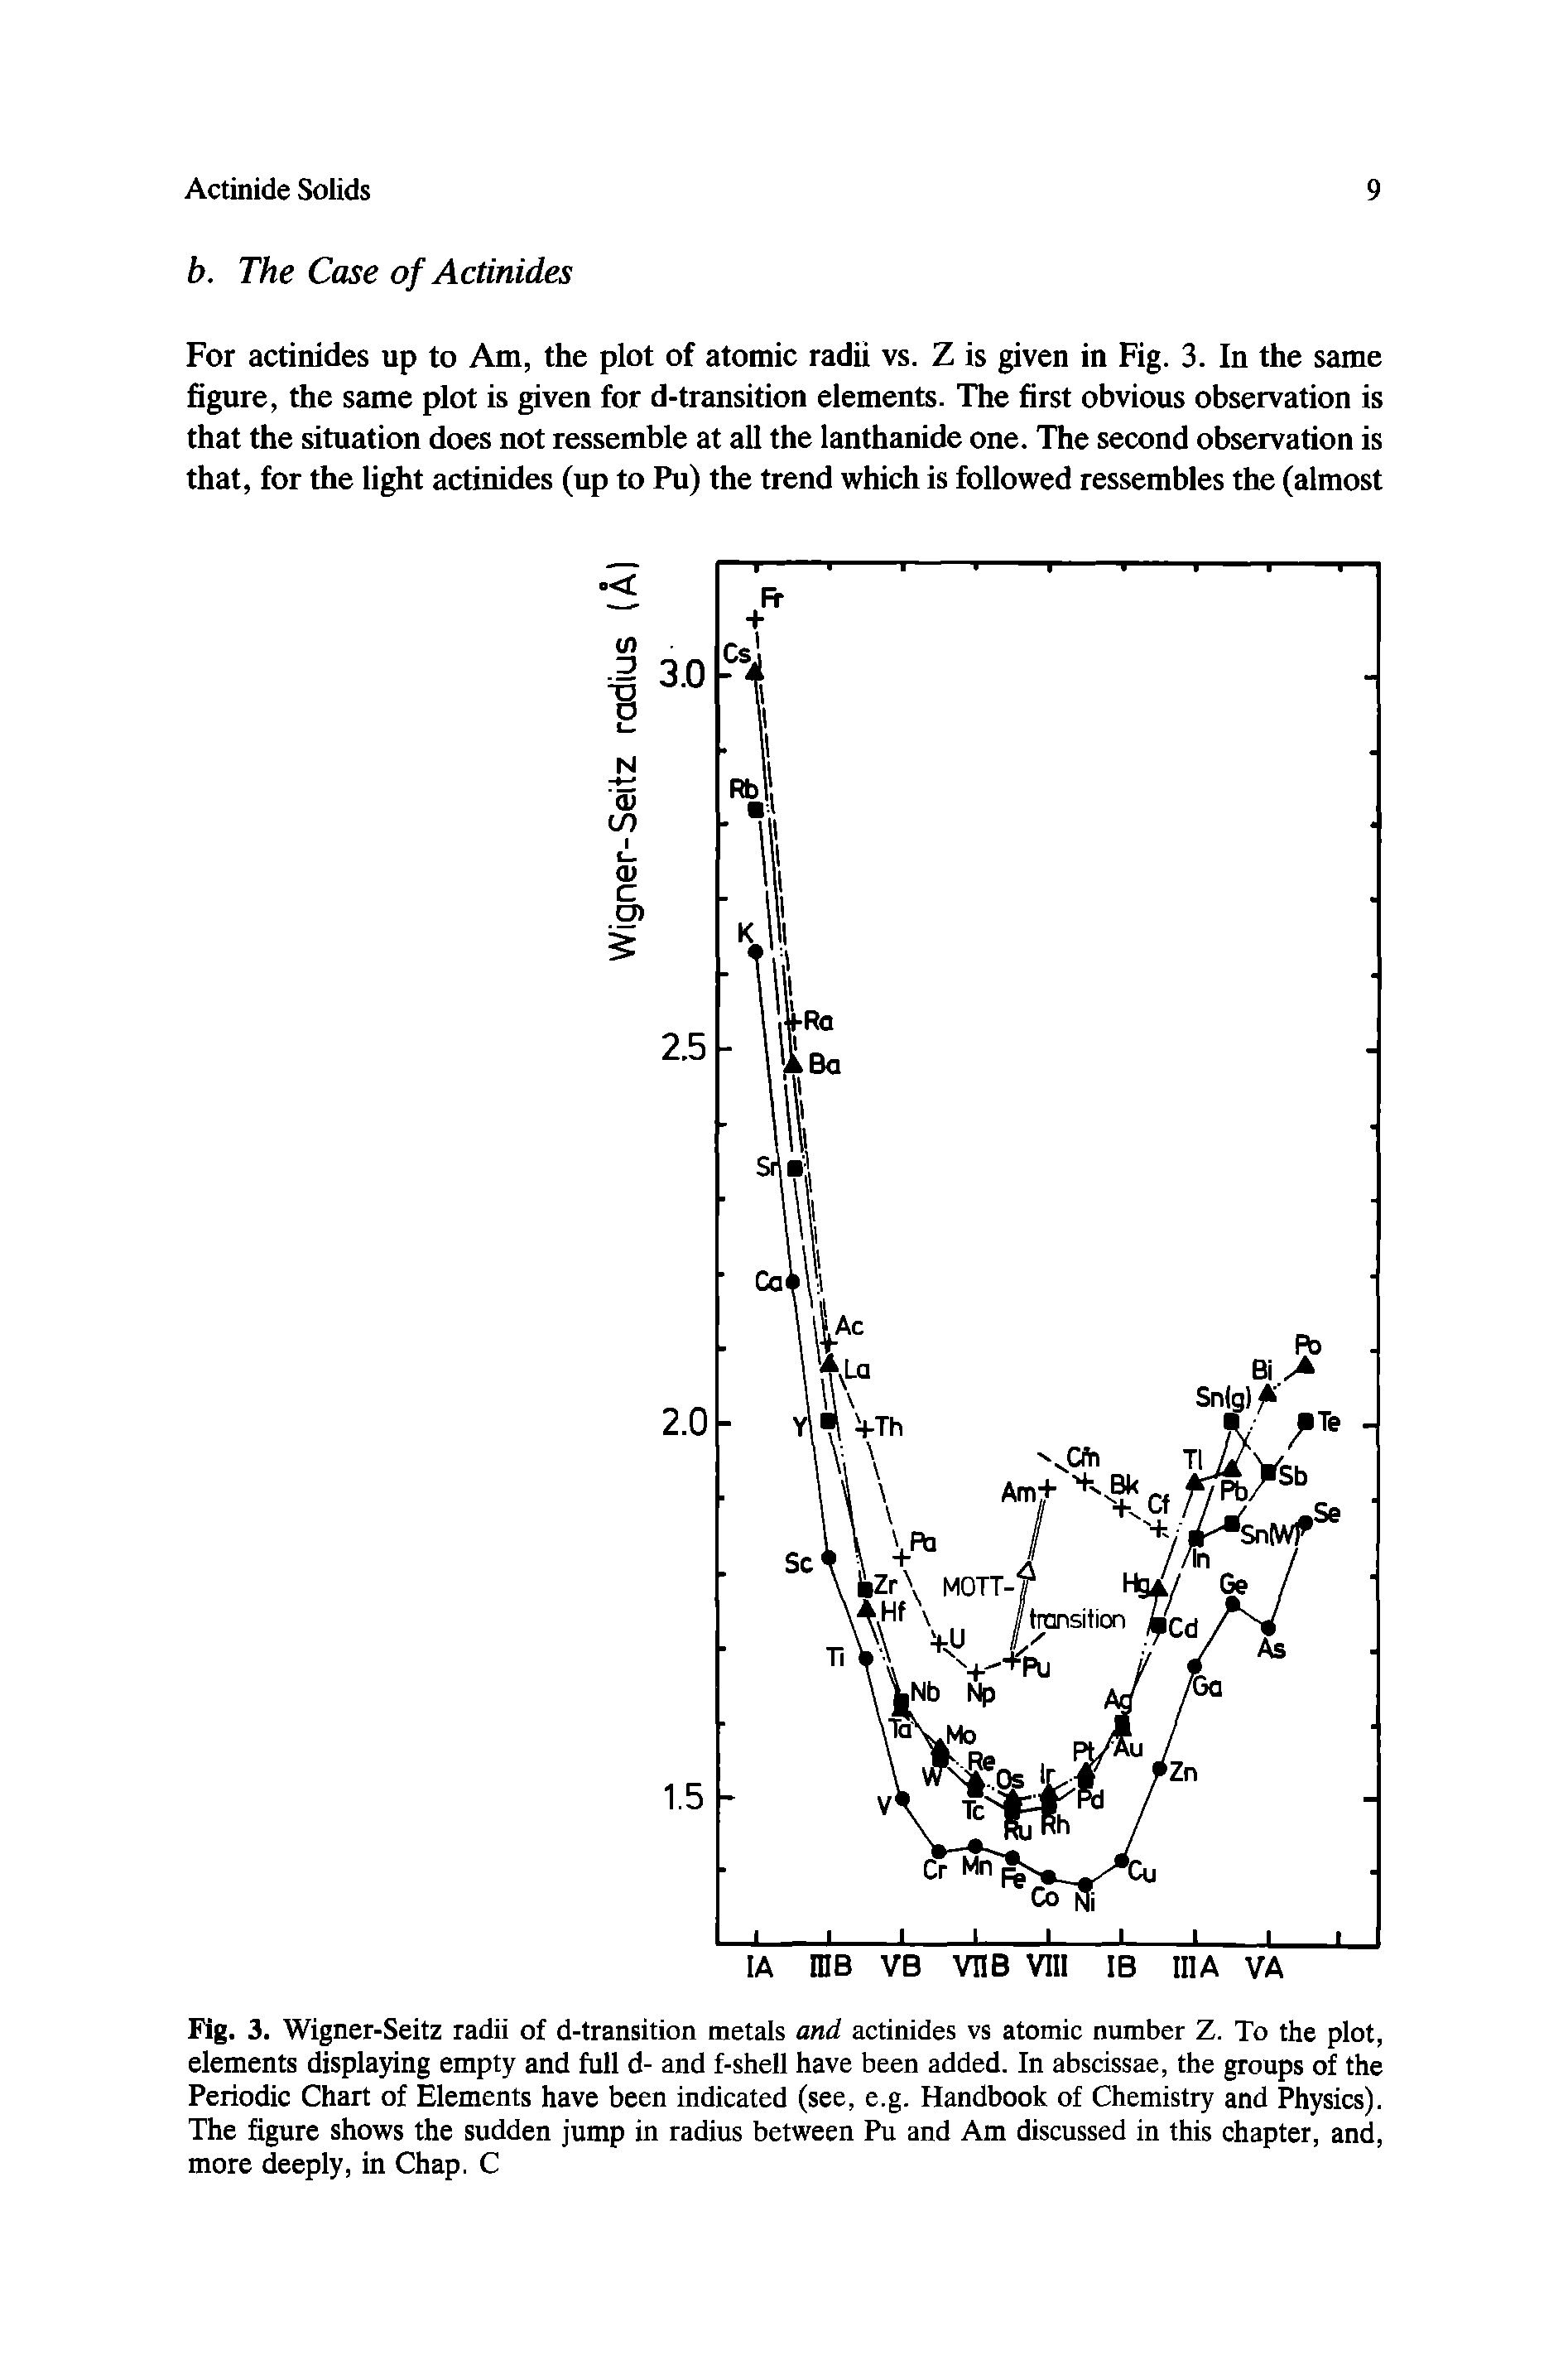 Fig. 3. Wigner-Seitz radii of d-transition metals and actinides vs atomic number Z. To the plot, elements displaying empty and full d- and f-shell have been added. In abscissae, the groups of the Periodic Chart of Elements have been indicated (see, e.g. Handbook of Chemistry and Physics). The figure shows the sudden jump in radius between Pu and Am discussed in this chapter, and, more deeply, in Chap. C...